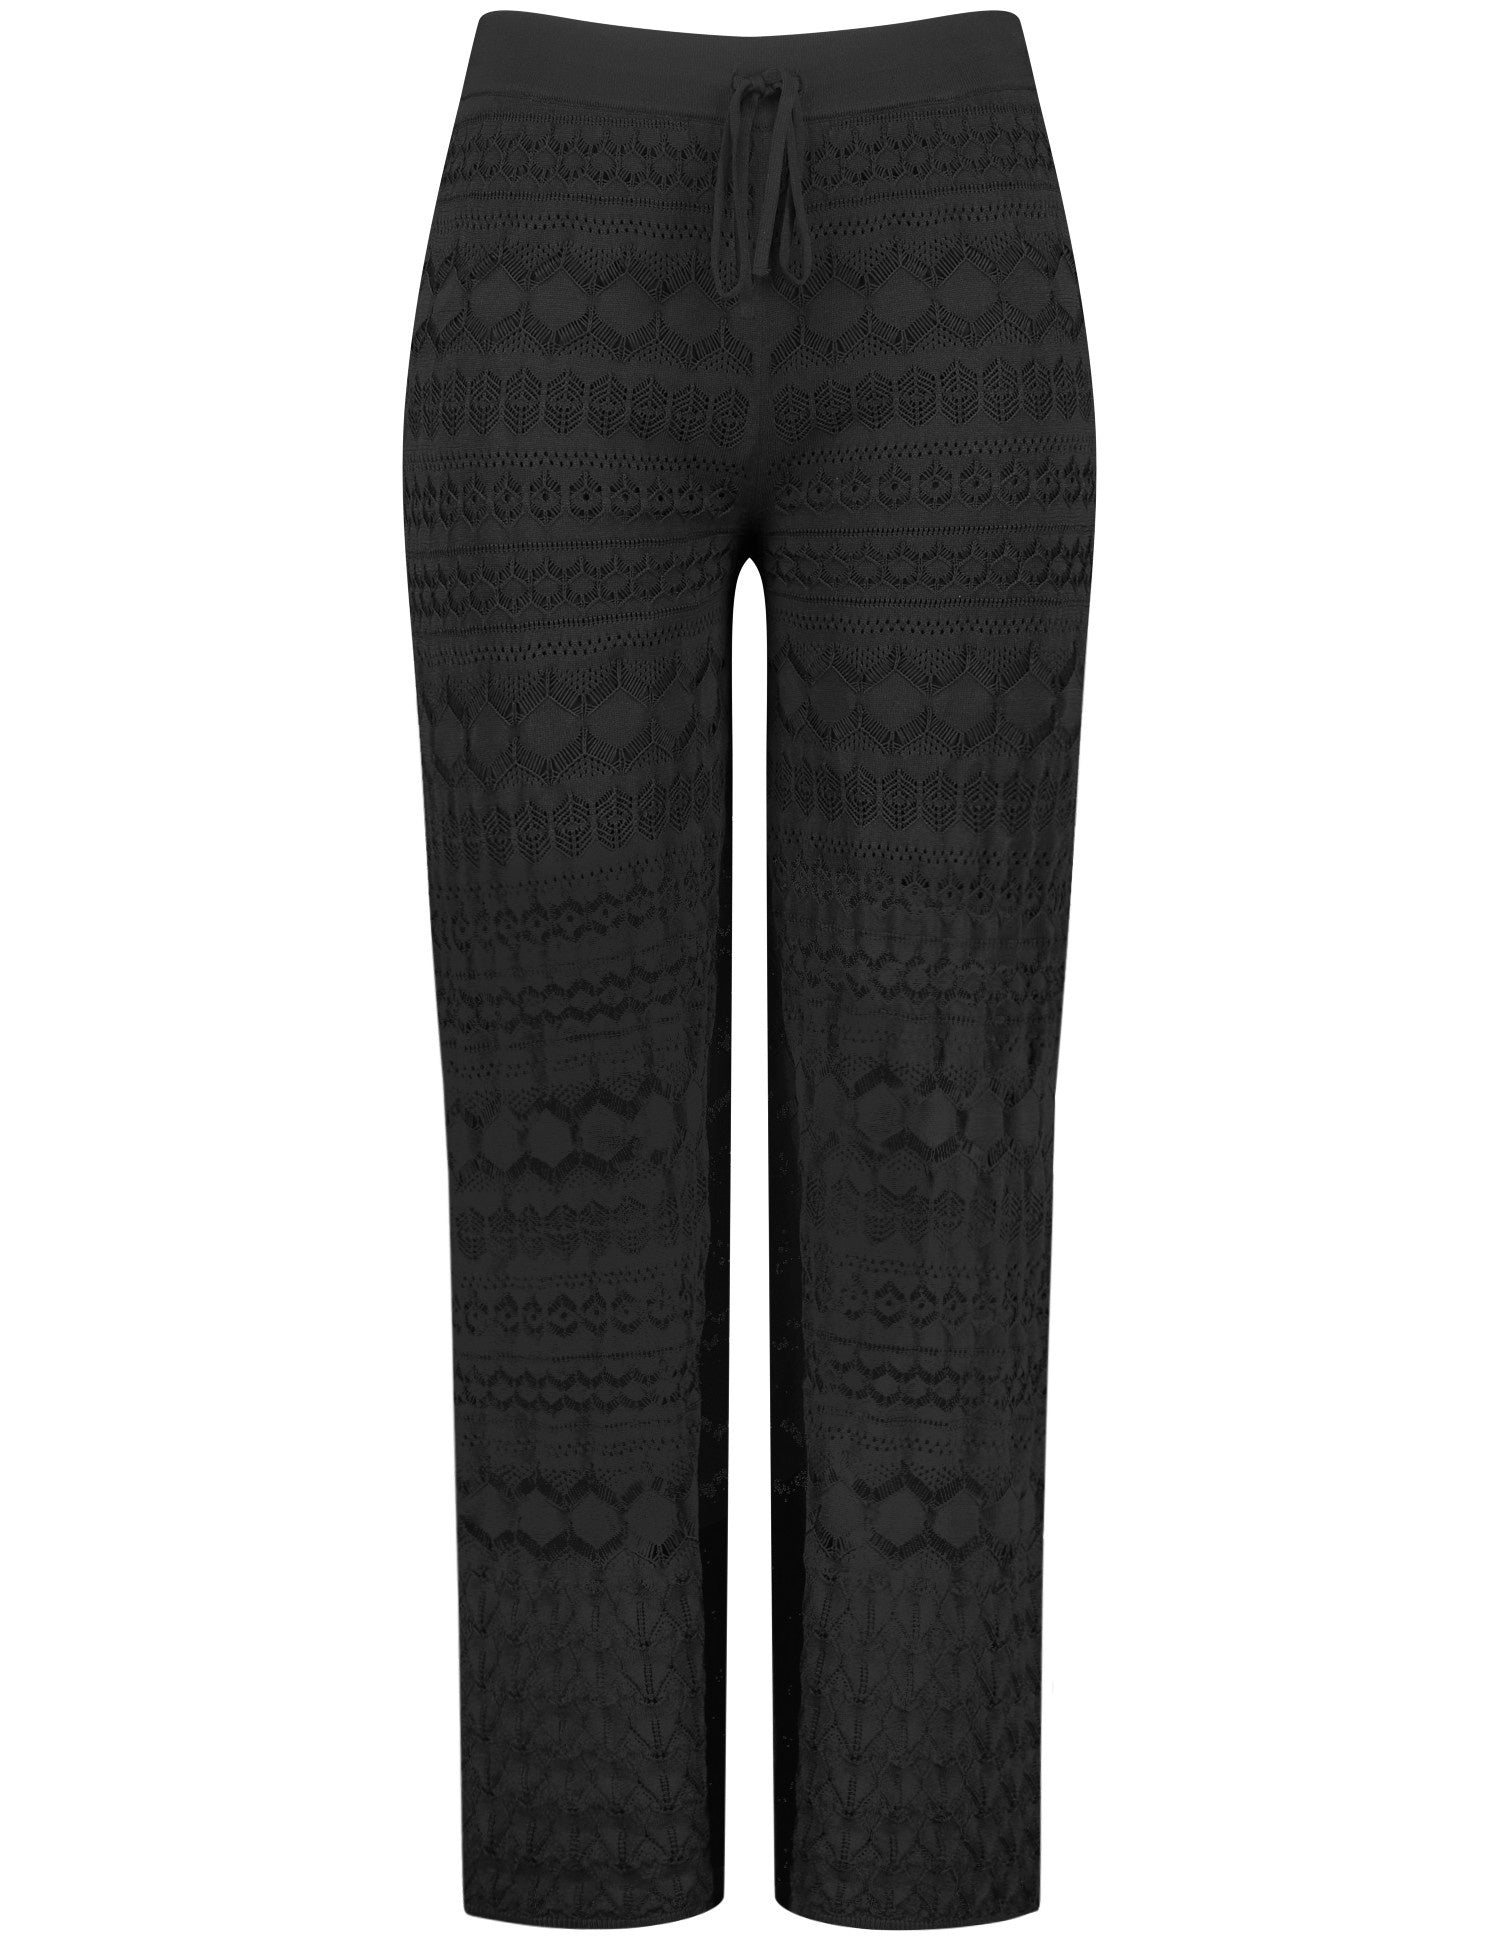 Wide Openwork Knit Trousers